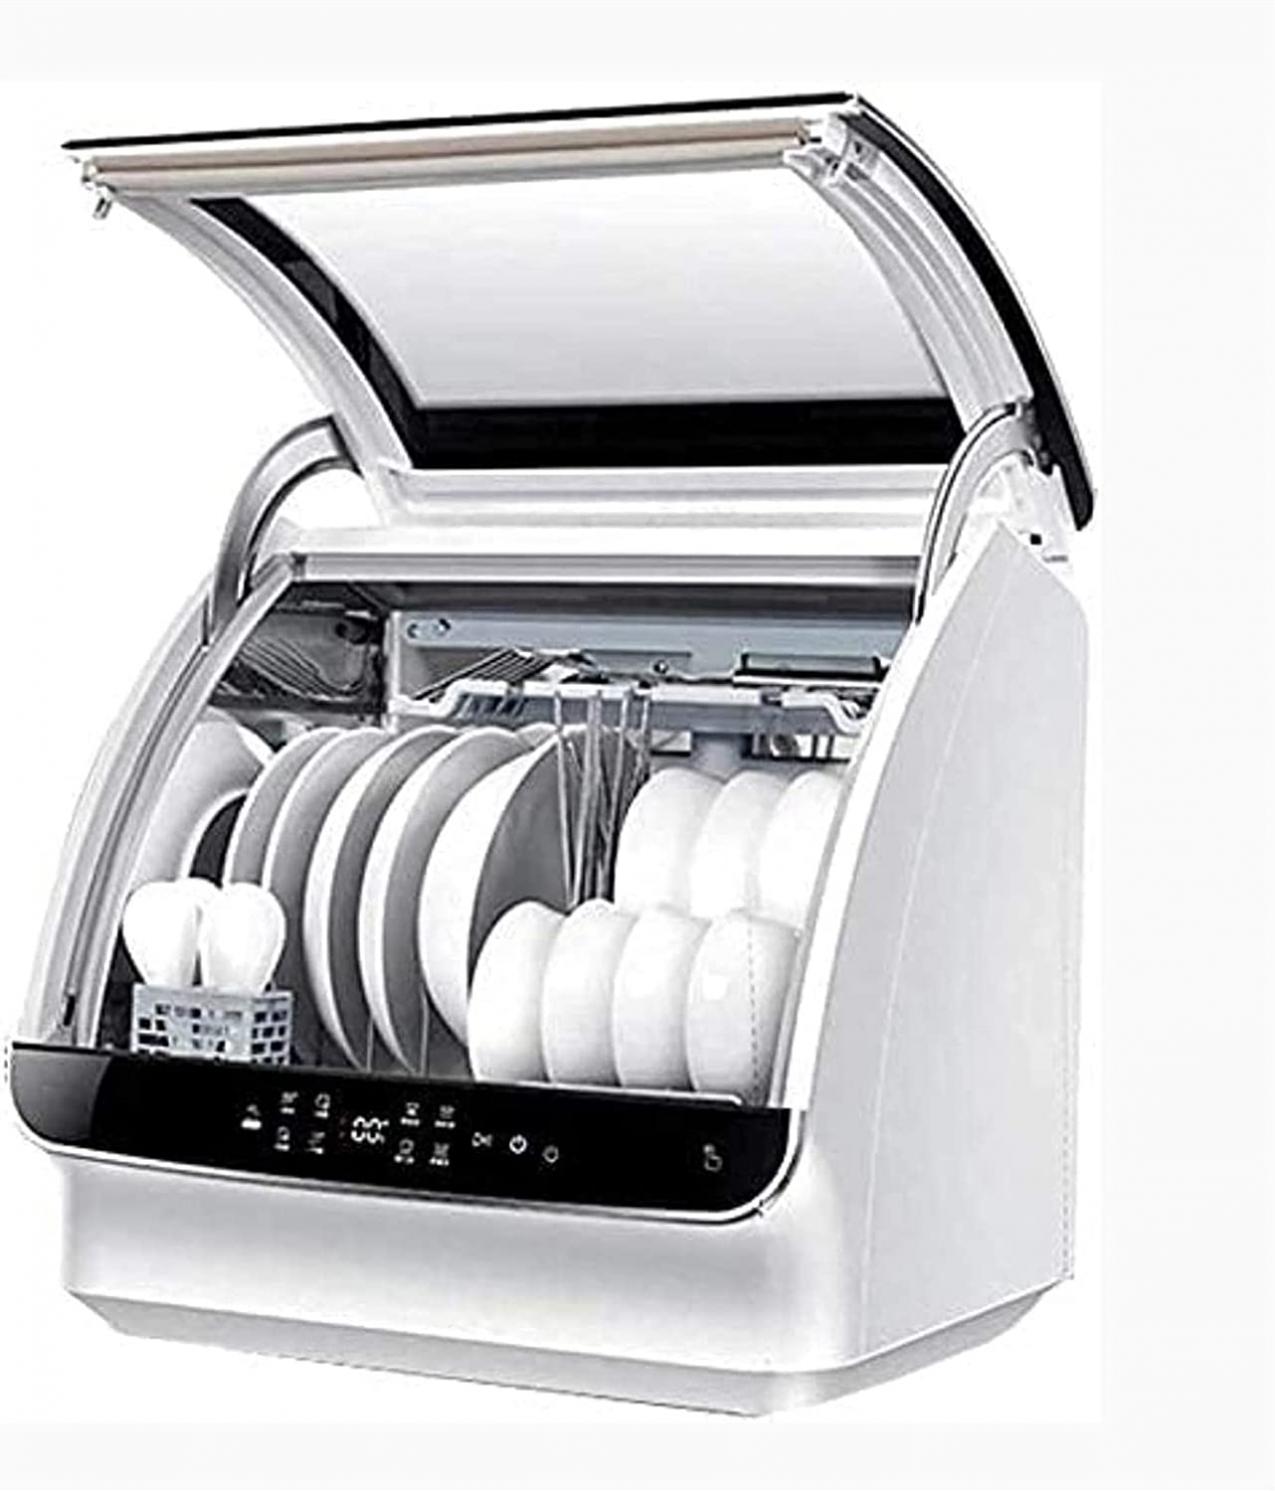 GATASE Countertop Dishwasher, Portable Compact Dishwasher with 4 Washing Programs, Anti-Leakage, Fruit & Vegetable Soaking with Basket, for Small Apartments, Dorms and RVs